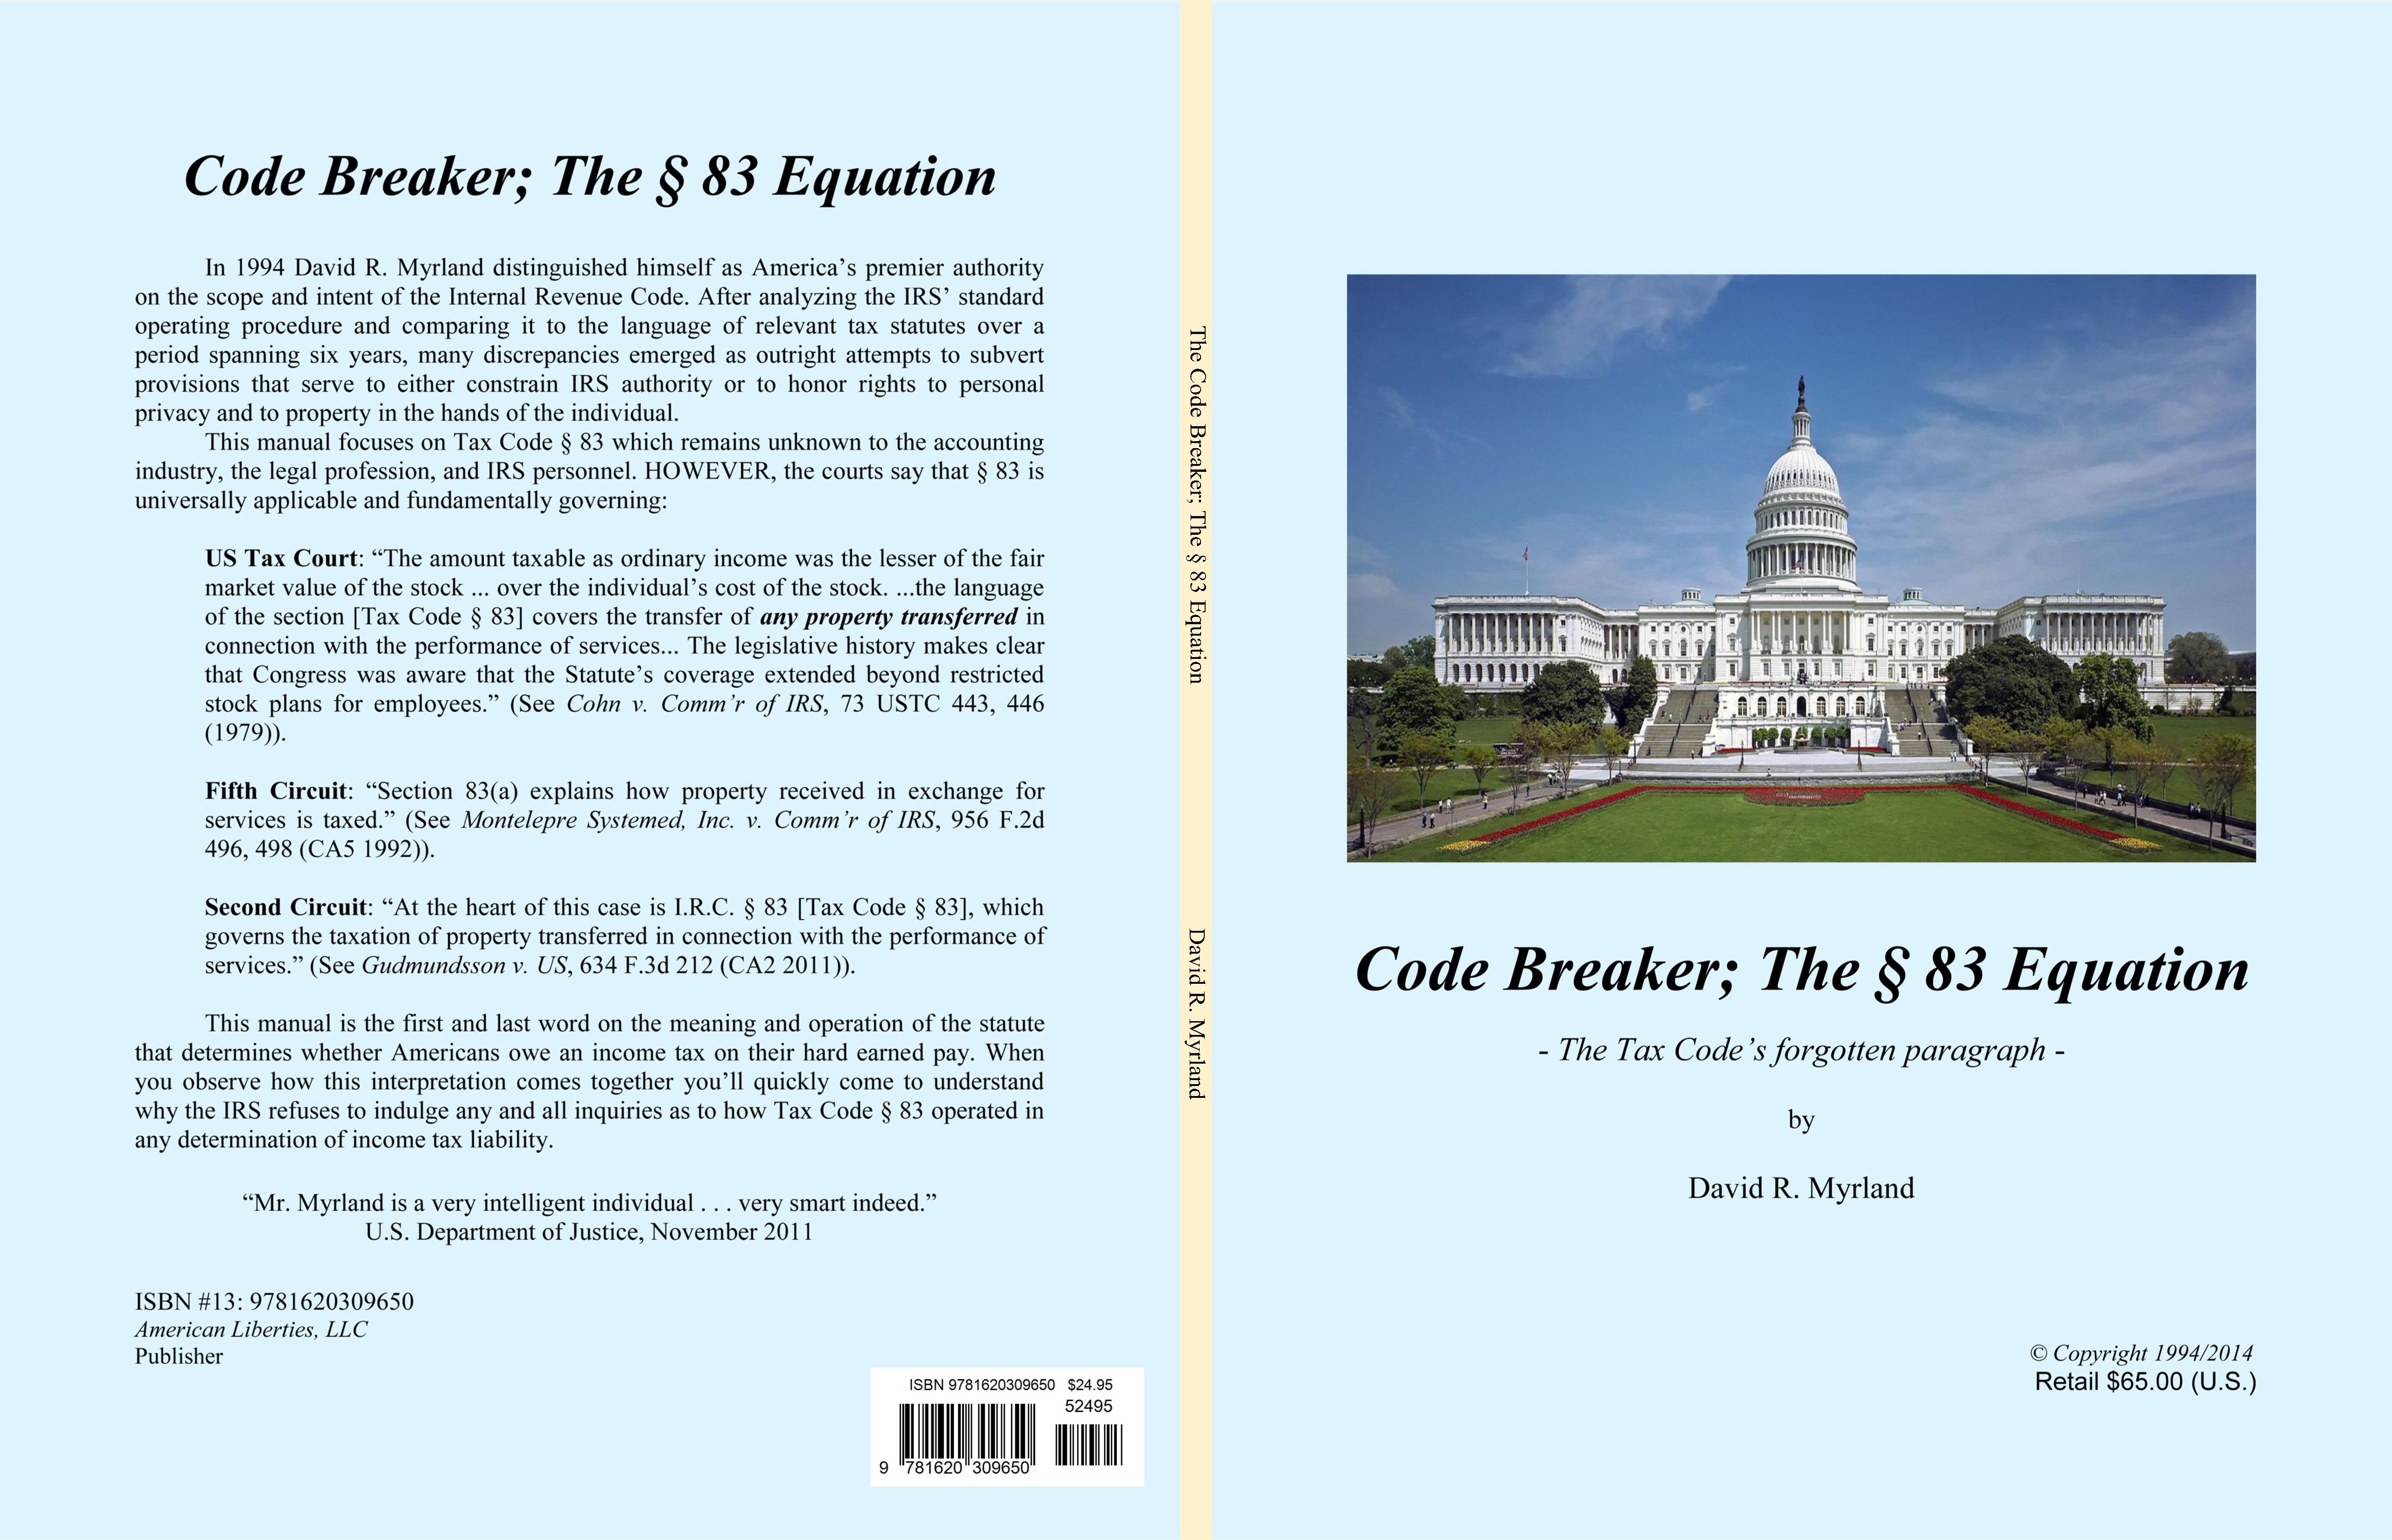 The Code Breaker; The § 83 Equation cover image